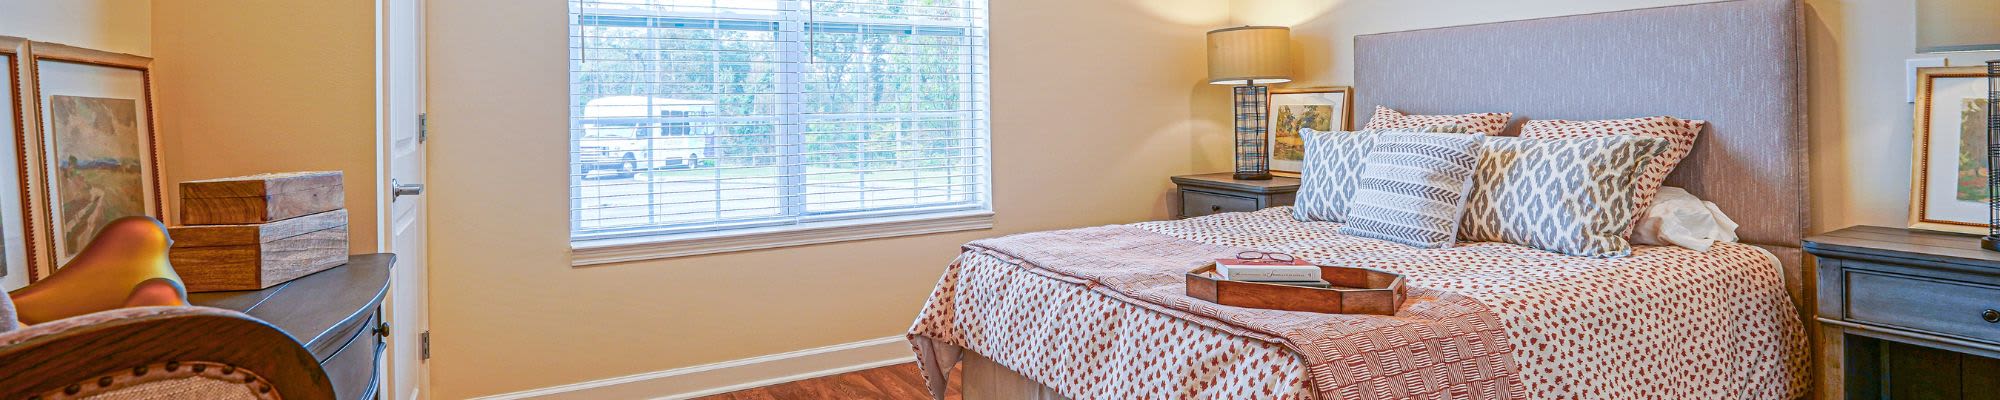 Independent Living at Harmony at Wescott in Summerville, South Carolina